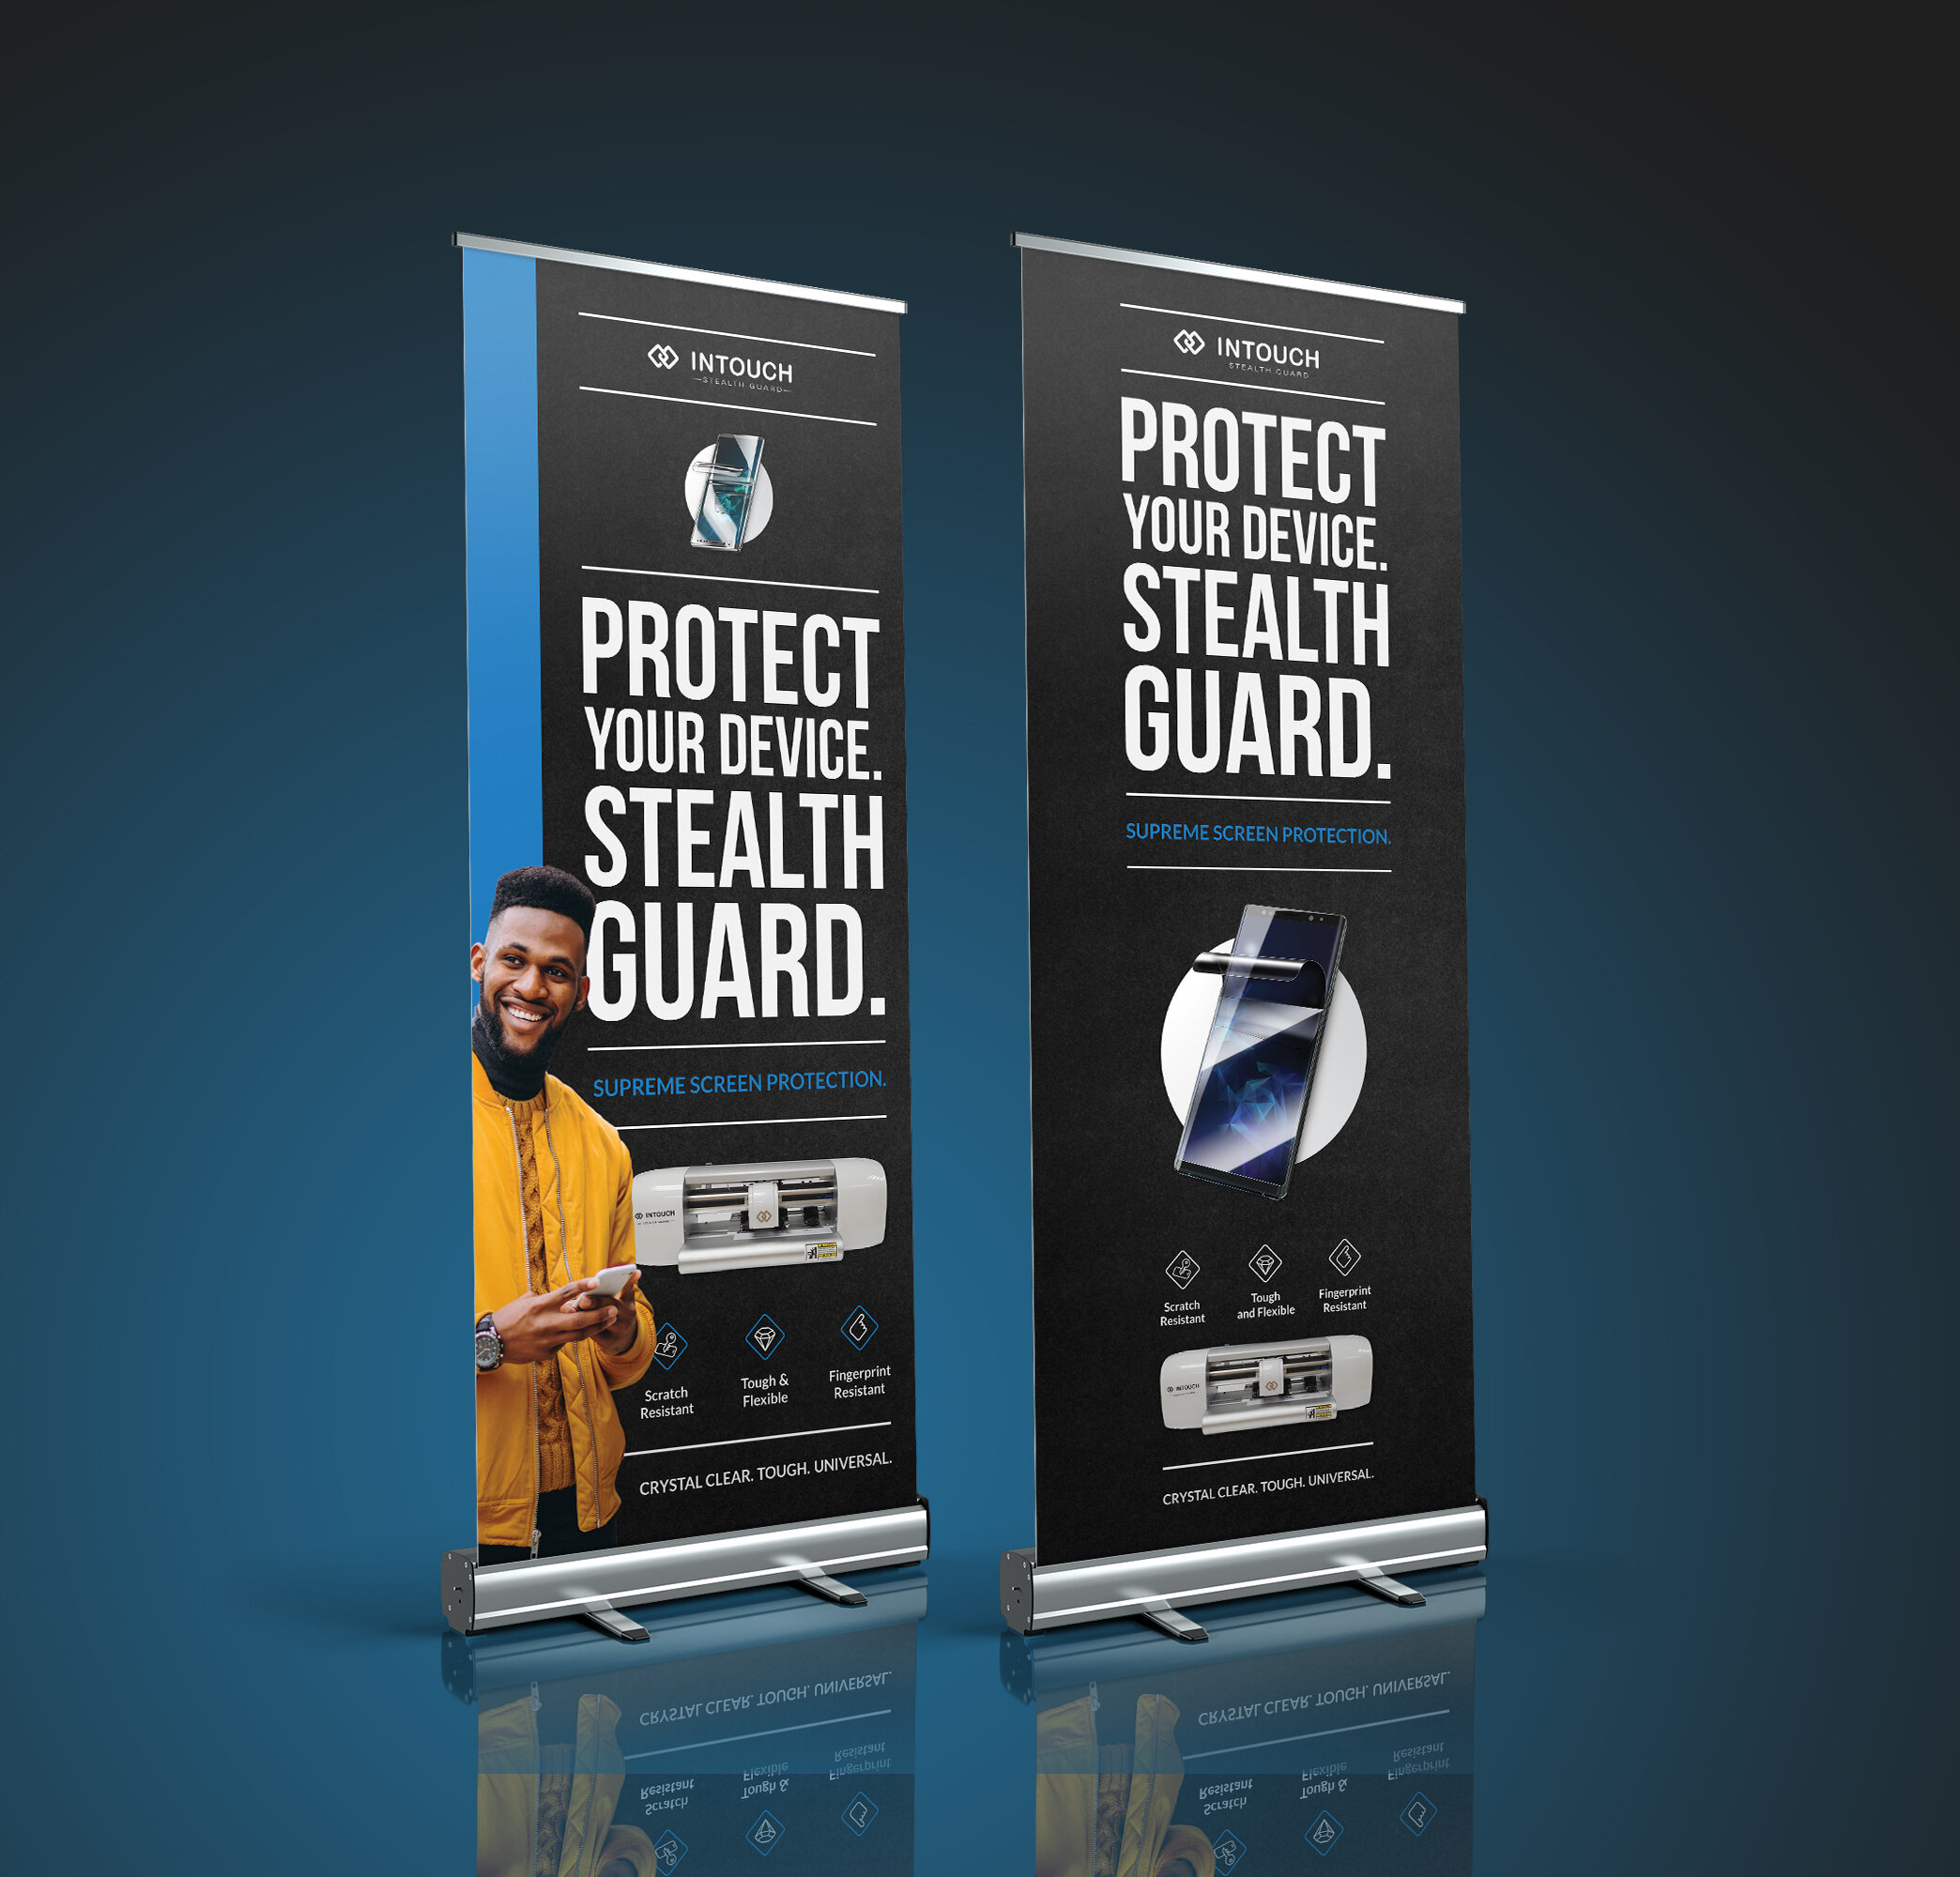 Stealth_Guard_pull-up-banner_Mock-up_v2-0_small.jpg